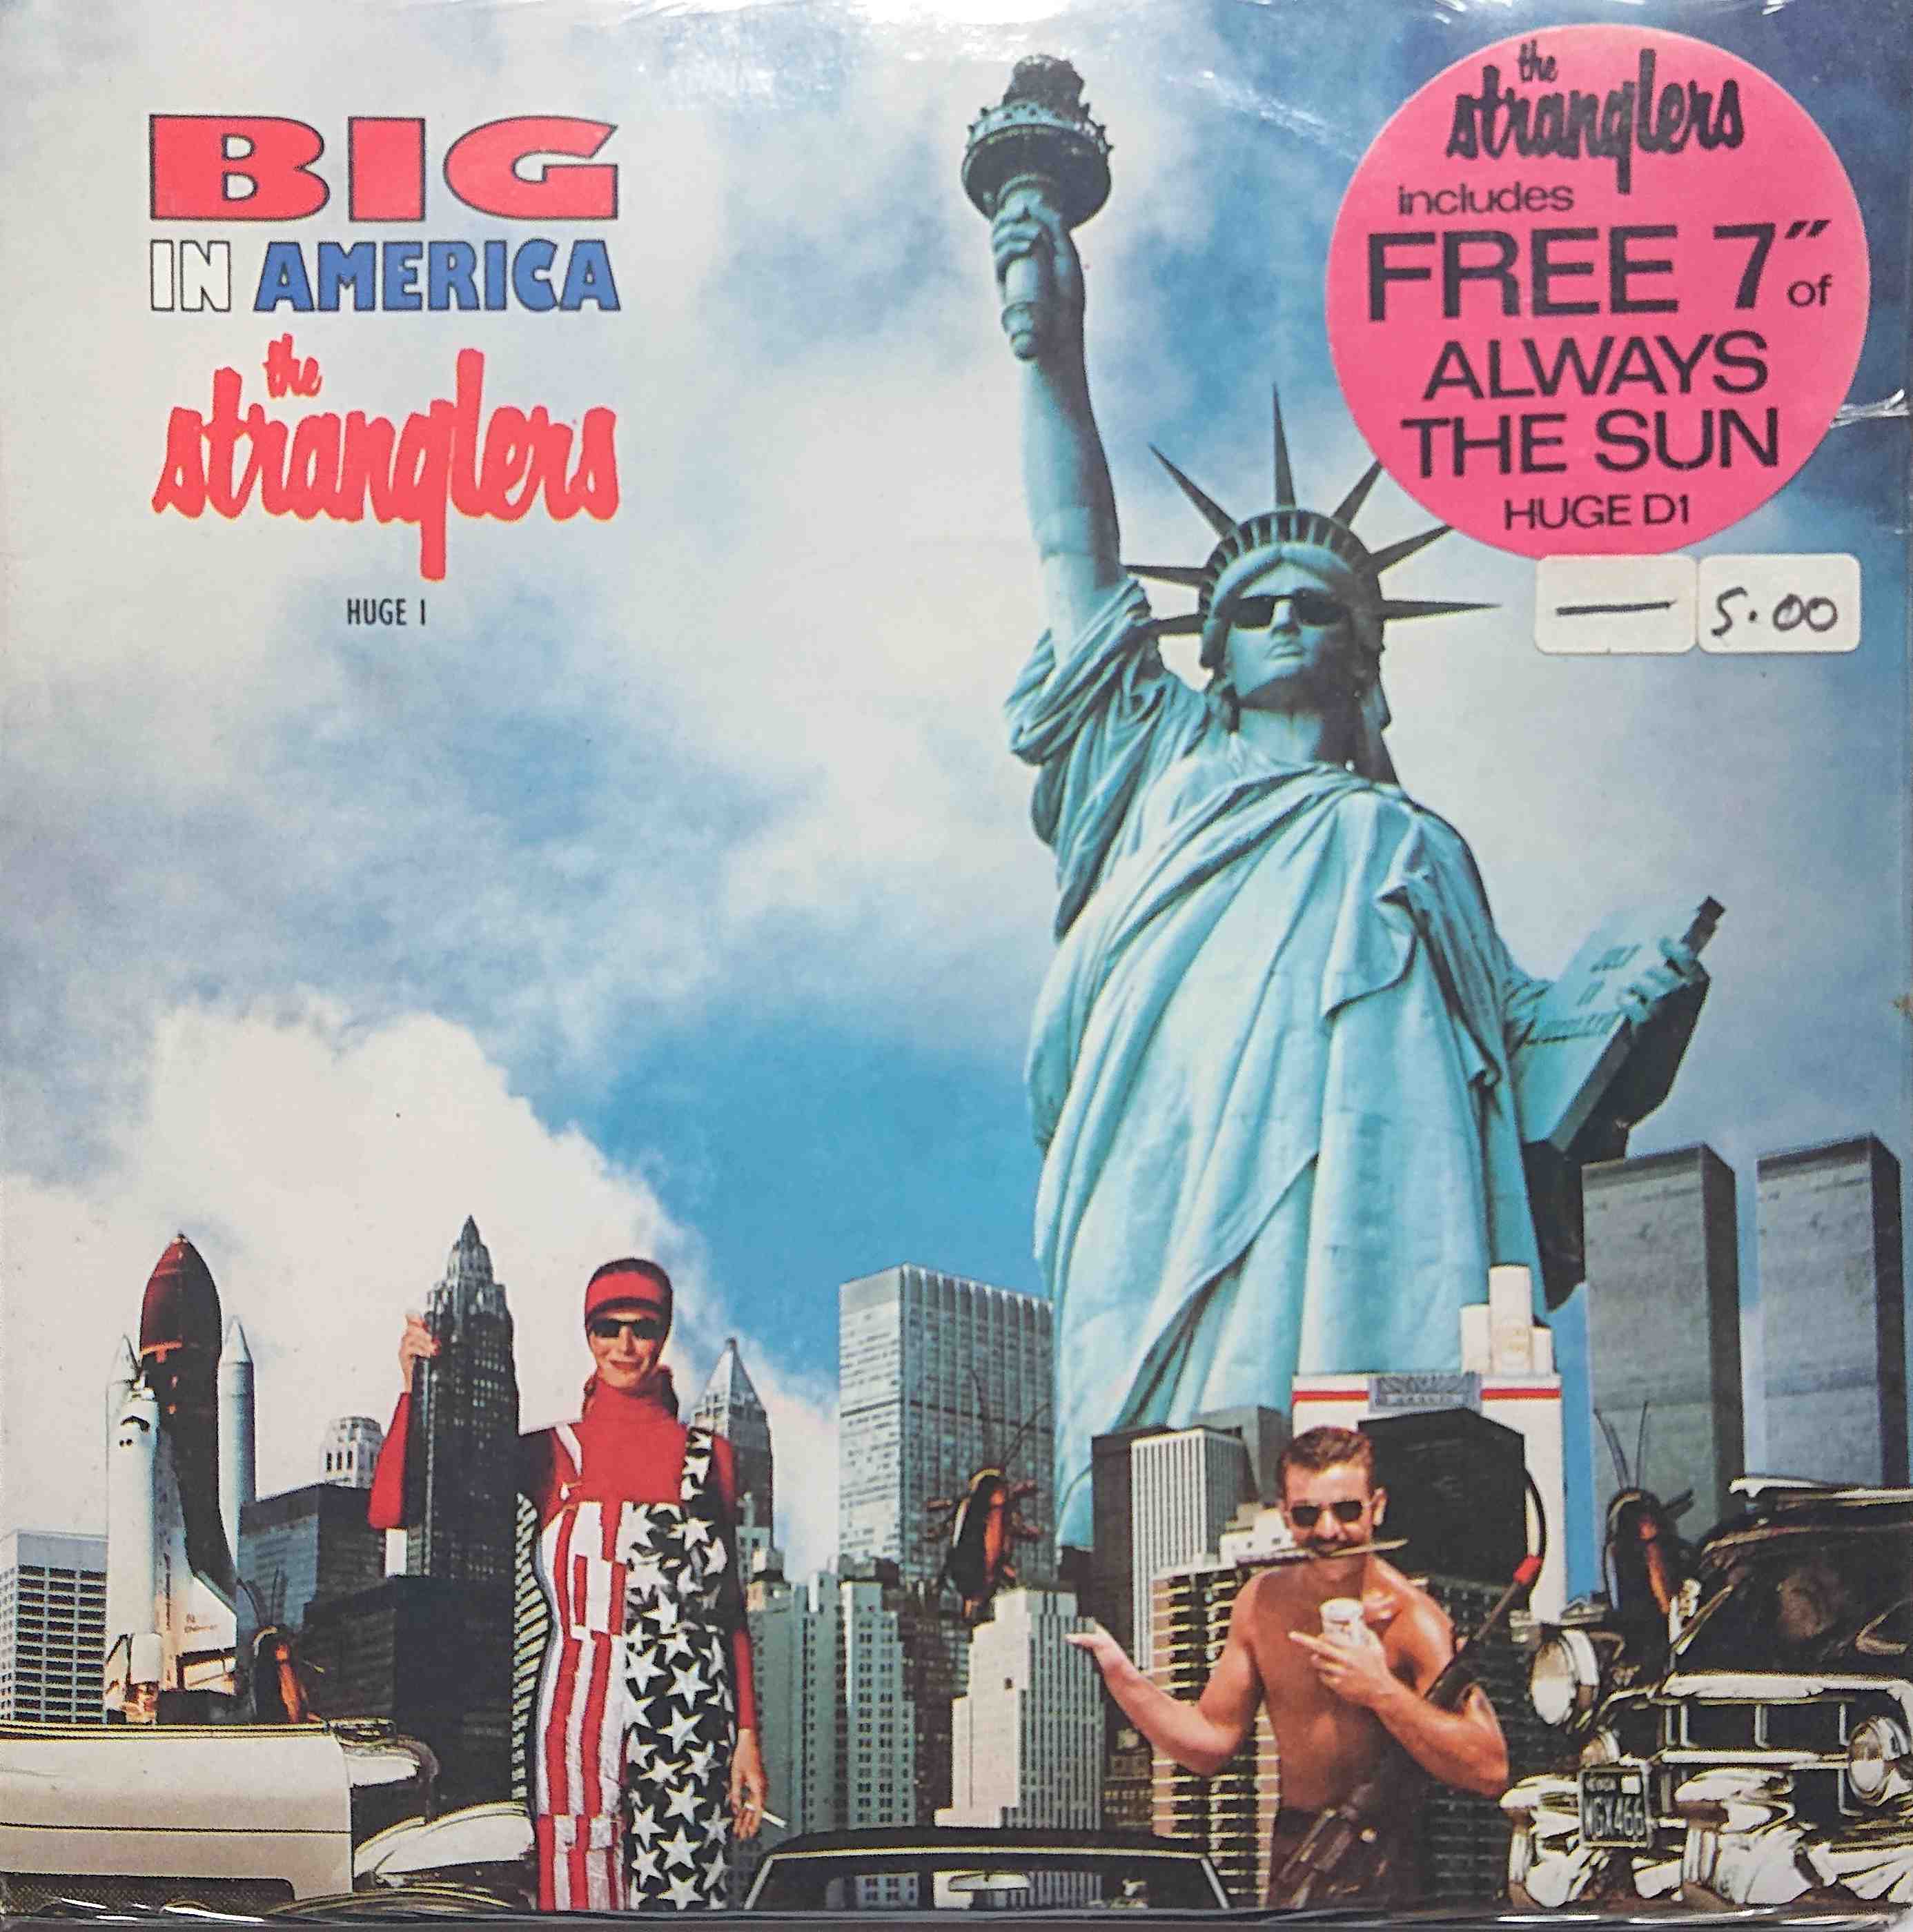 Picture of Big in America / Nice in Nice 2 by artist The Stranglers from The Stranglers singles